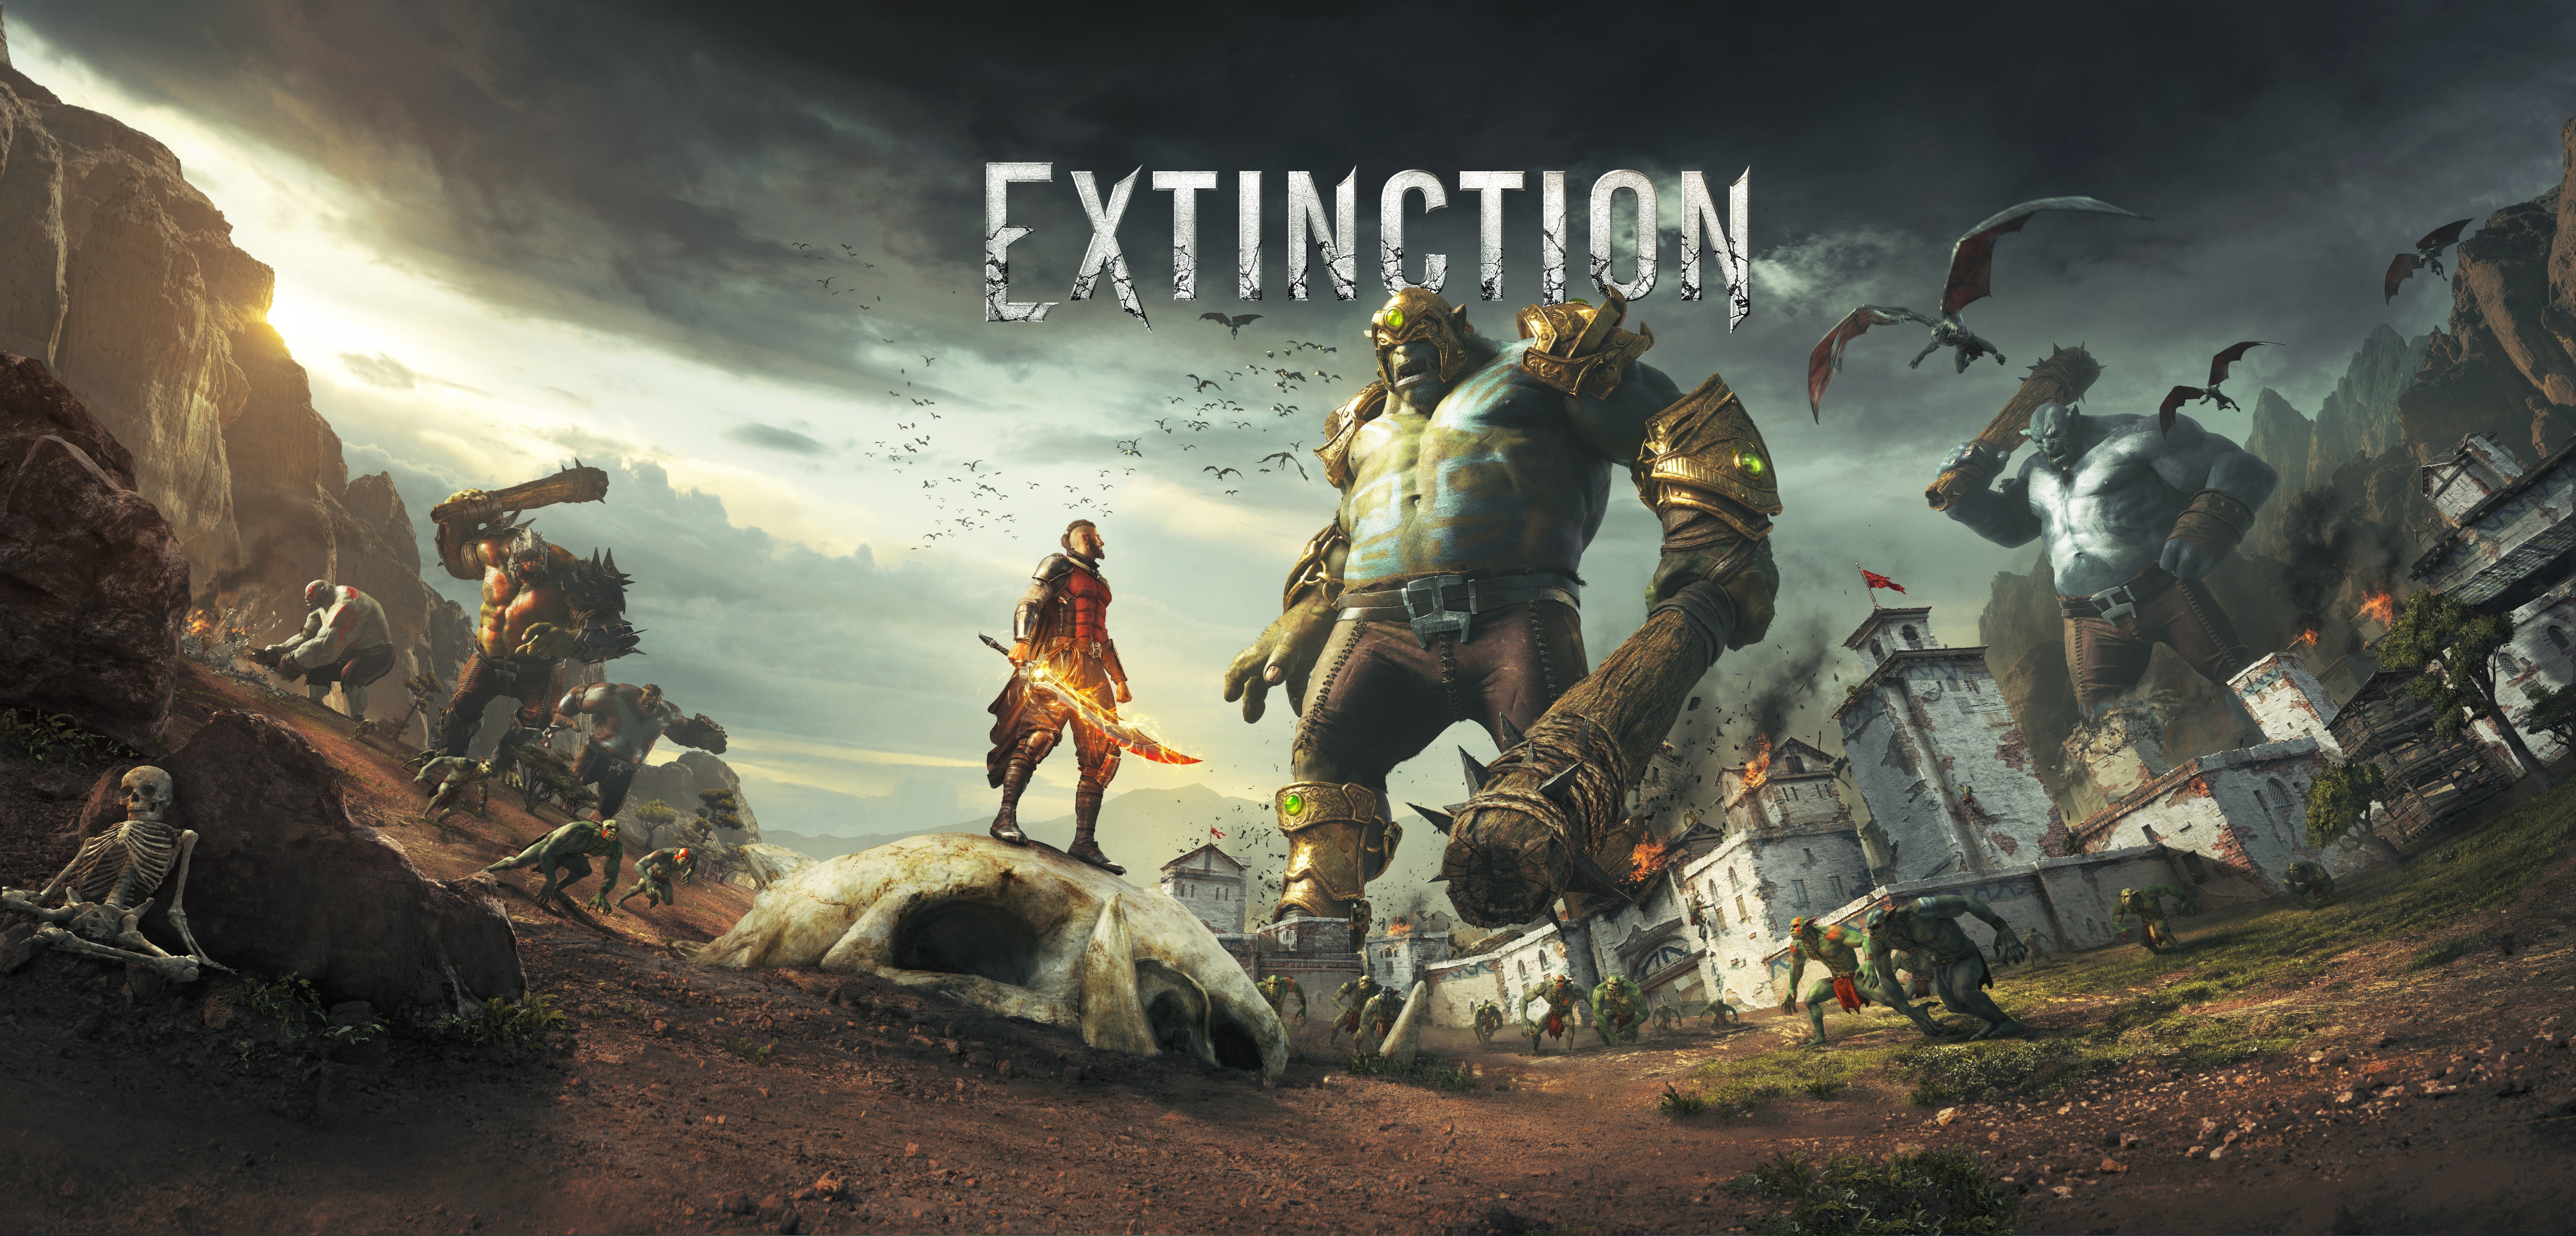 Extinction (Video Game) HD Wallpaper and Background